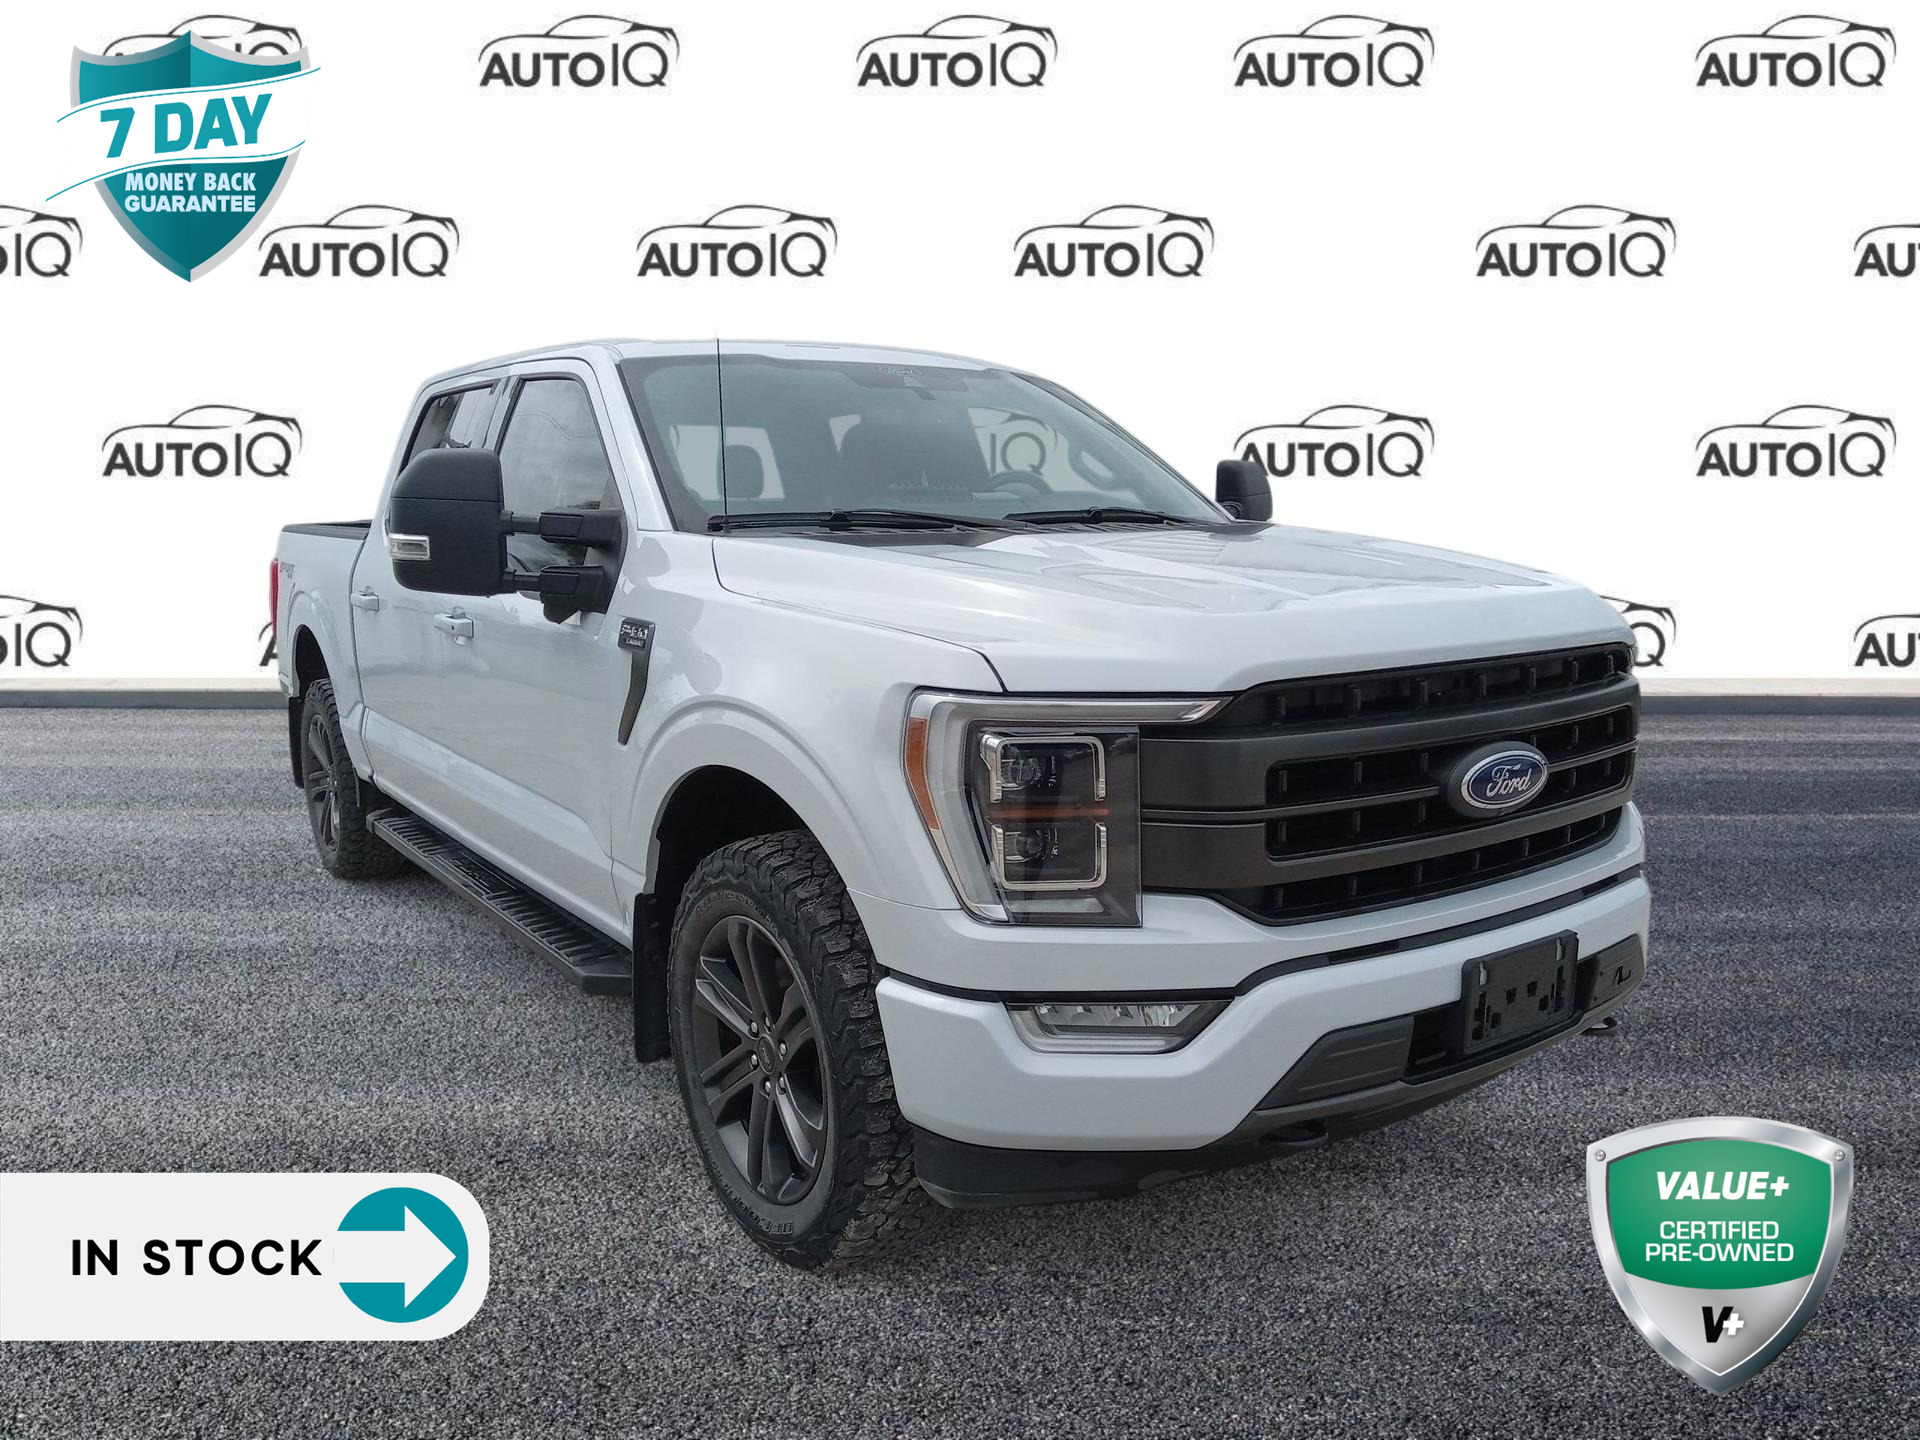 2021 Ford F-150 Lariat 5.0 | TWIN PANEL MOONROOF | TRAILER TOW PKG